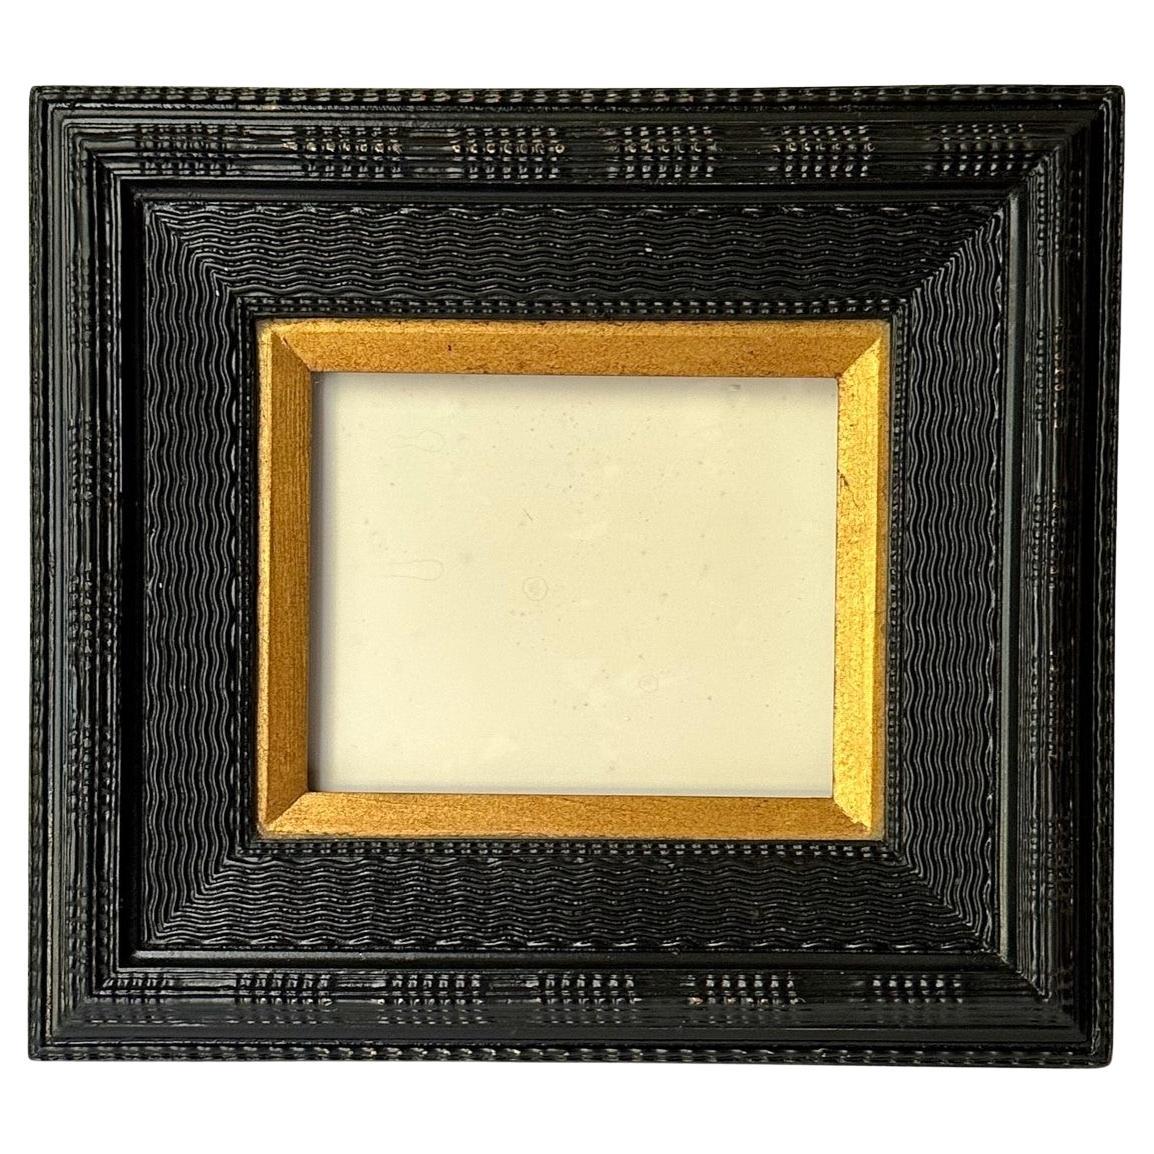 Dutch Ebonized Ripple Molded Picture Frame Early 20th Century. For Sale